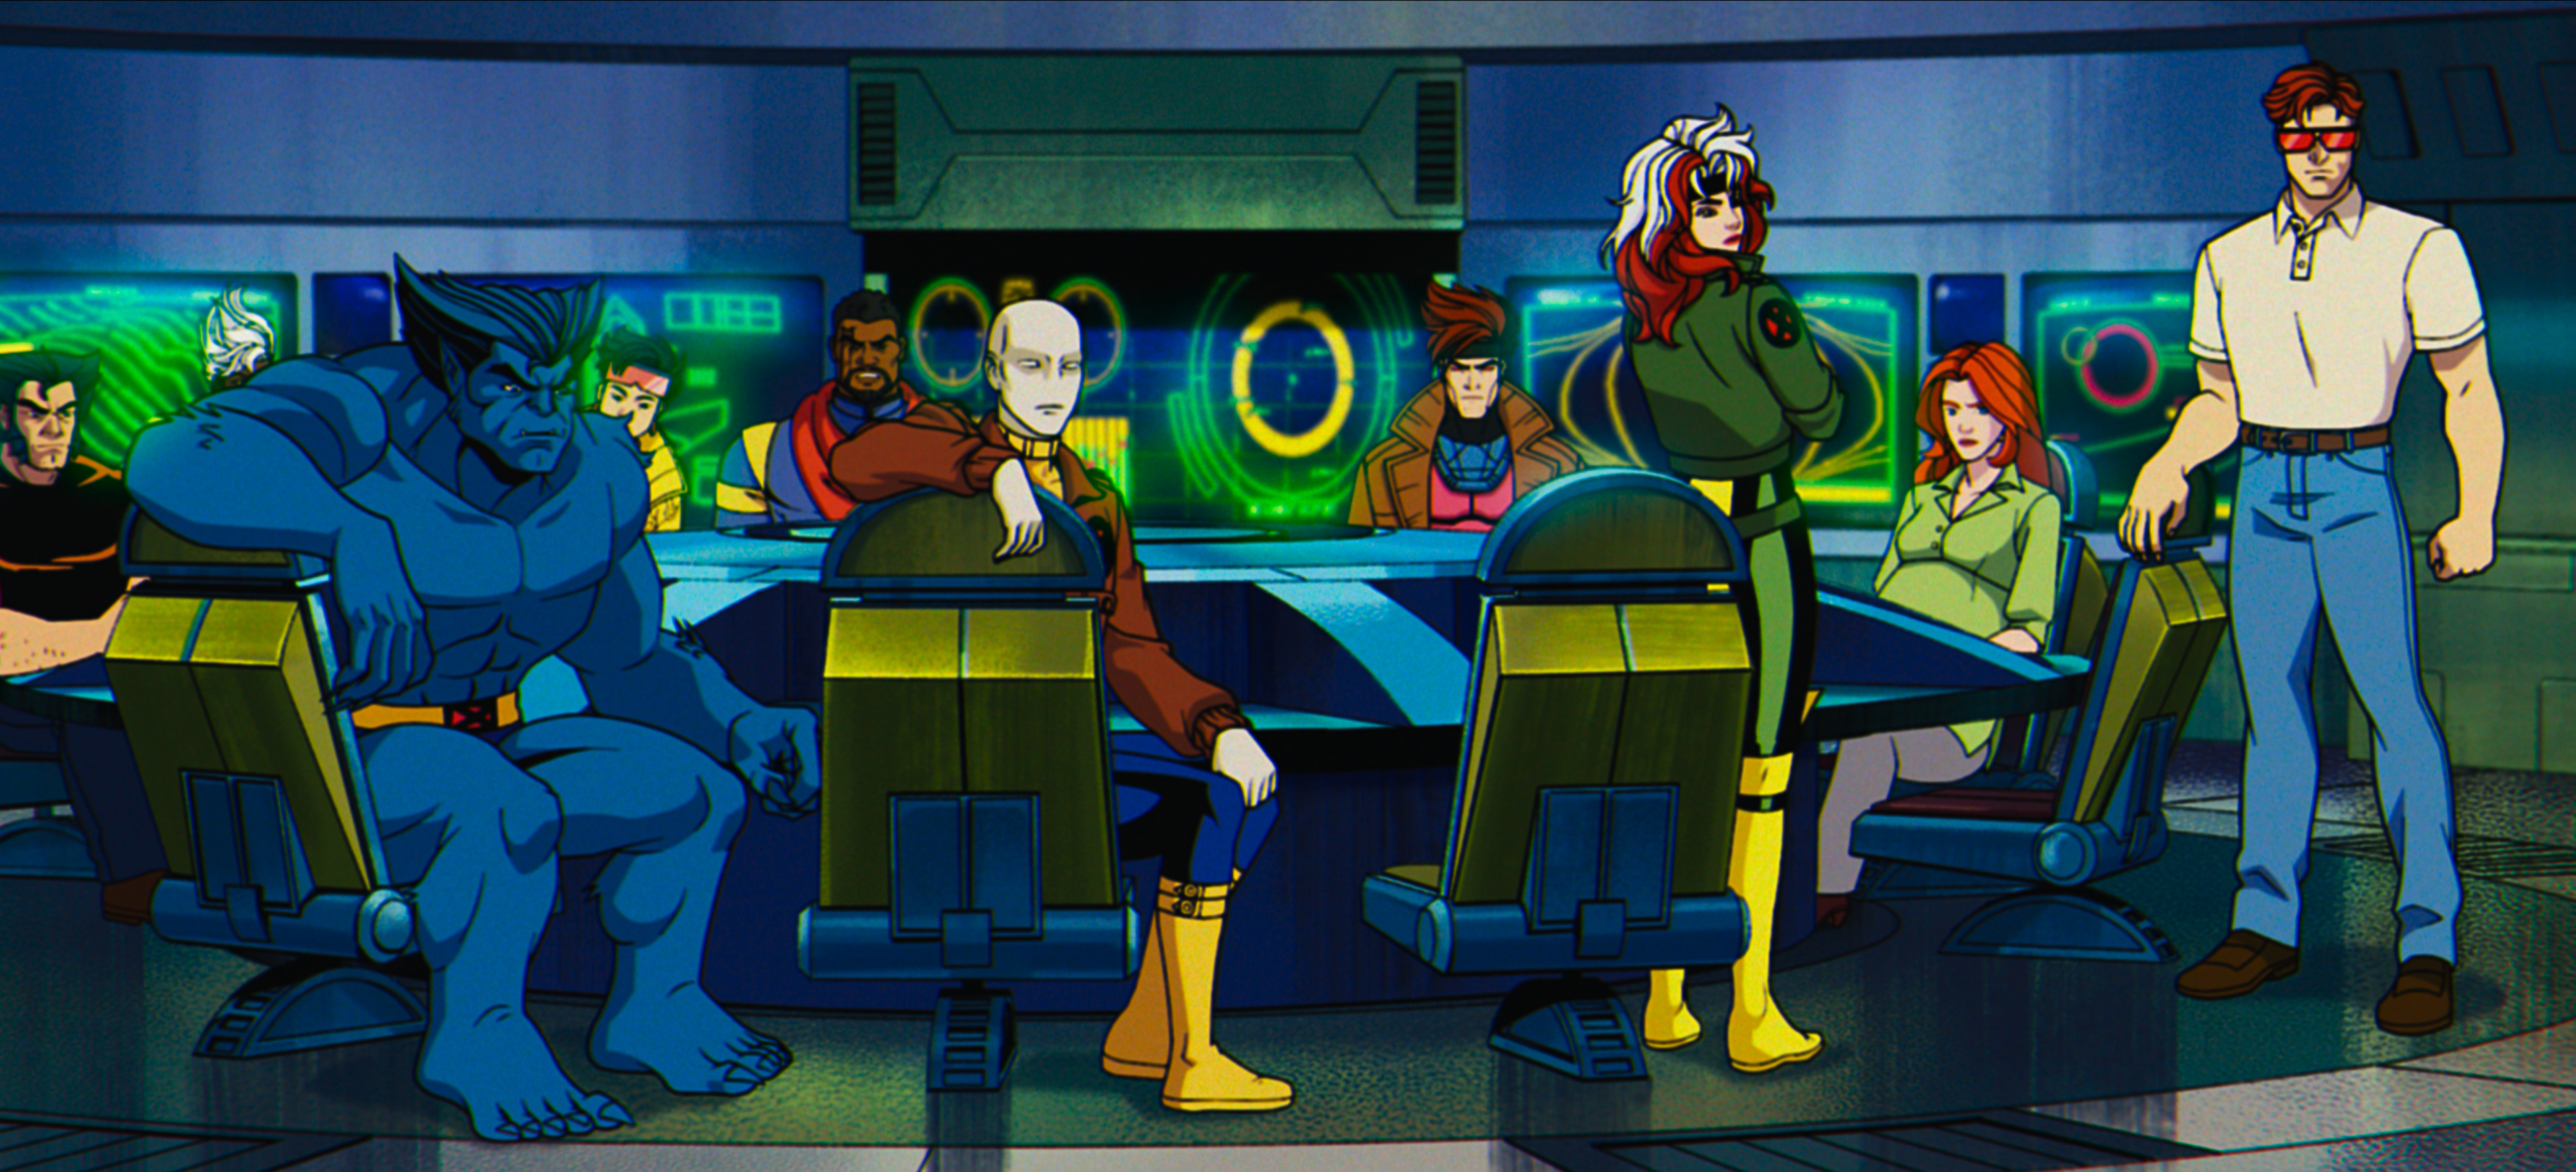 Animated characters from X-Men sitting and standing in a high-tech command center